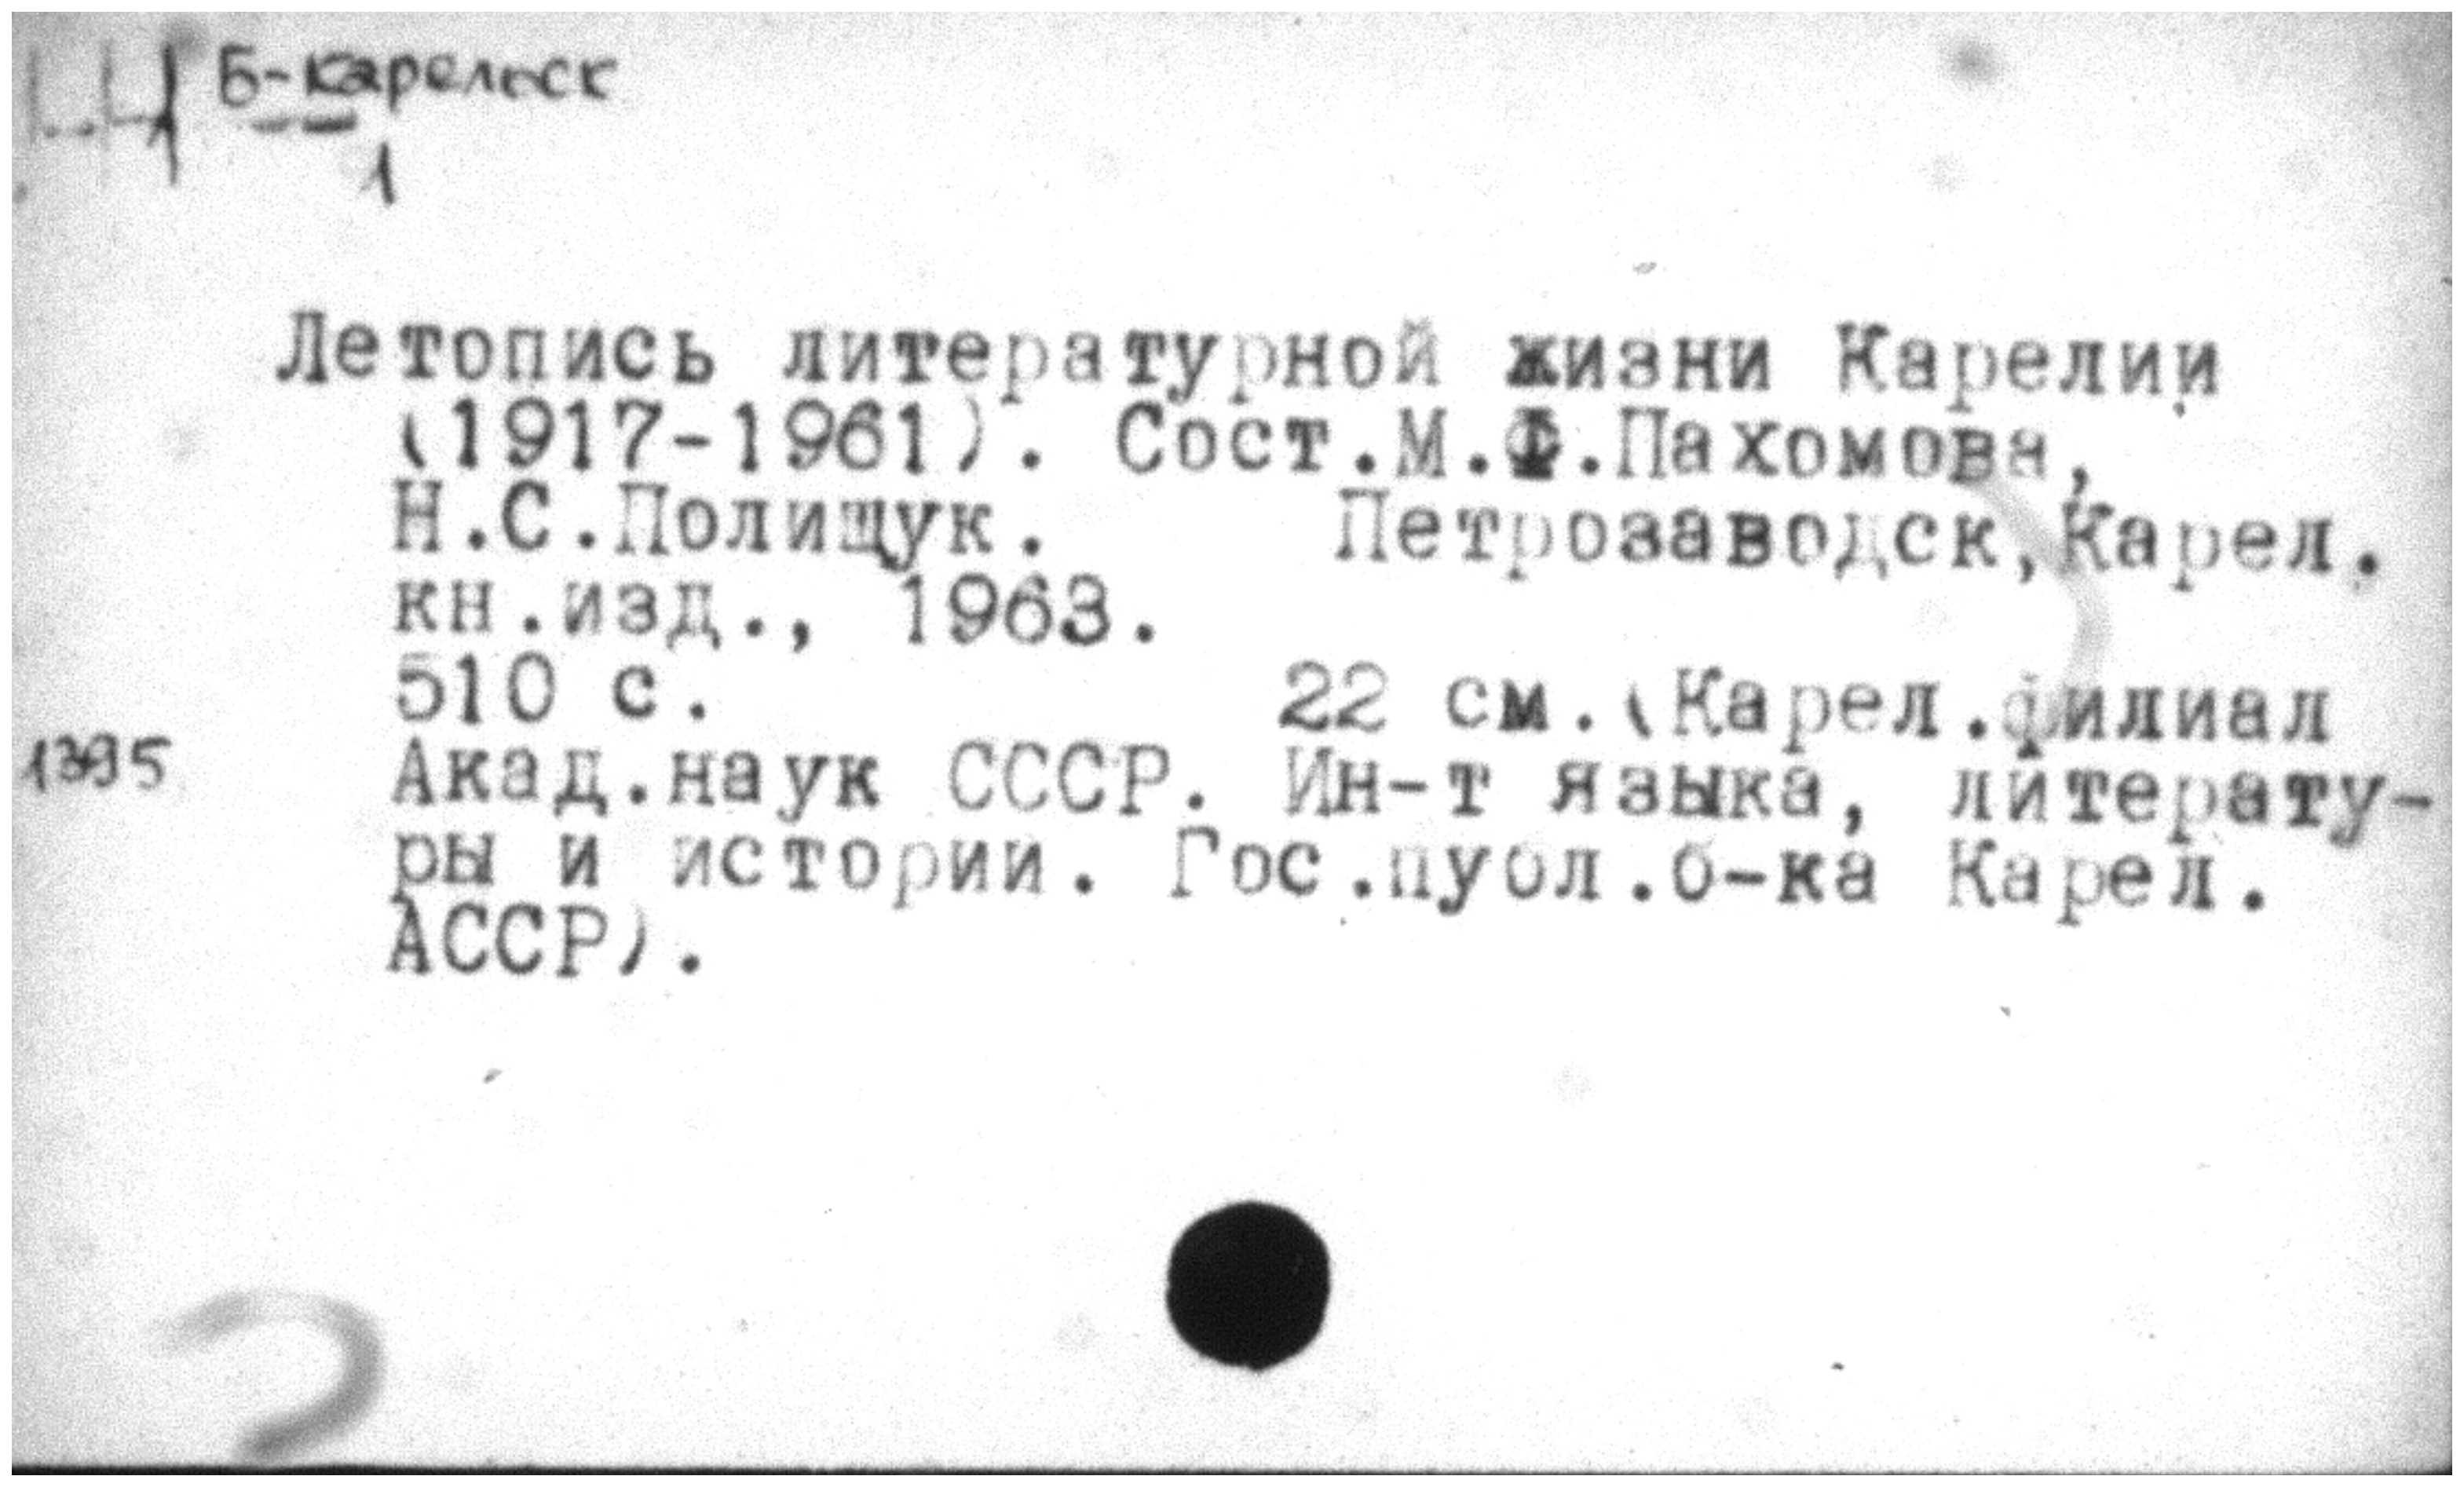 Scanned card from Karelia imprint catalog example 3